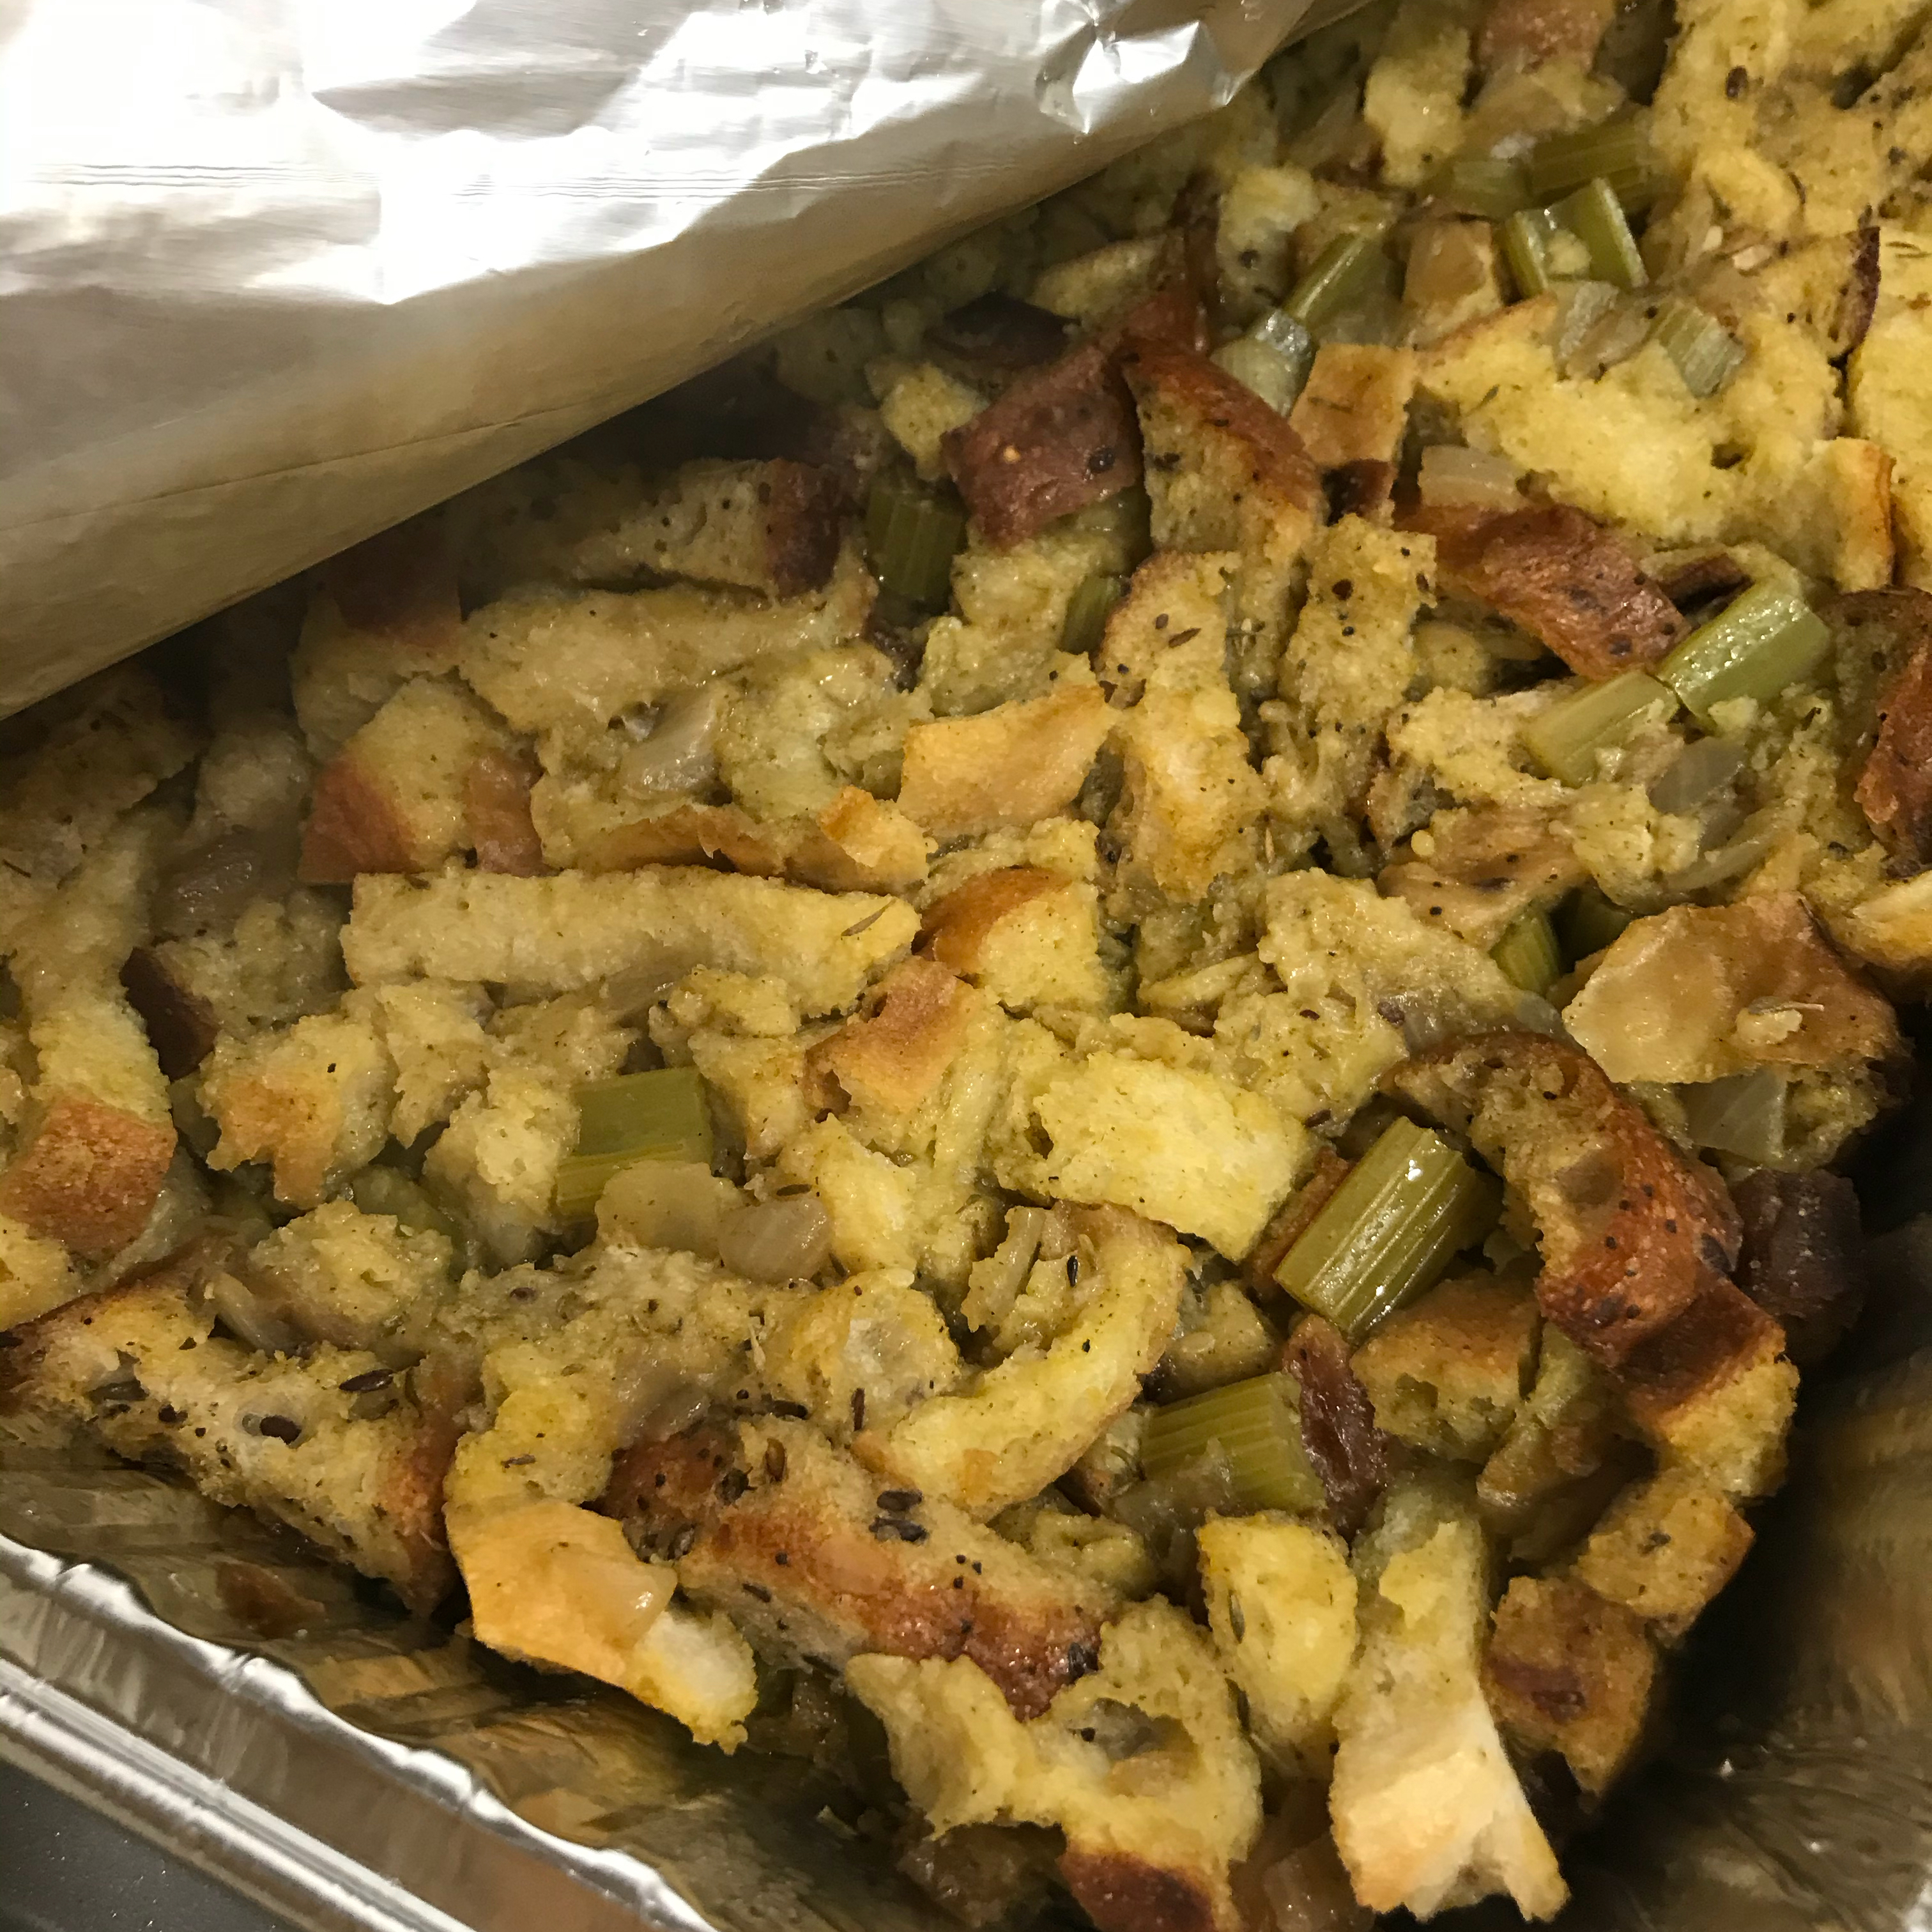 Classic Herb Stuffing